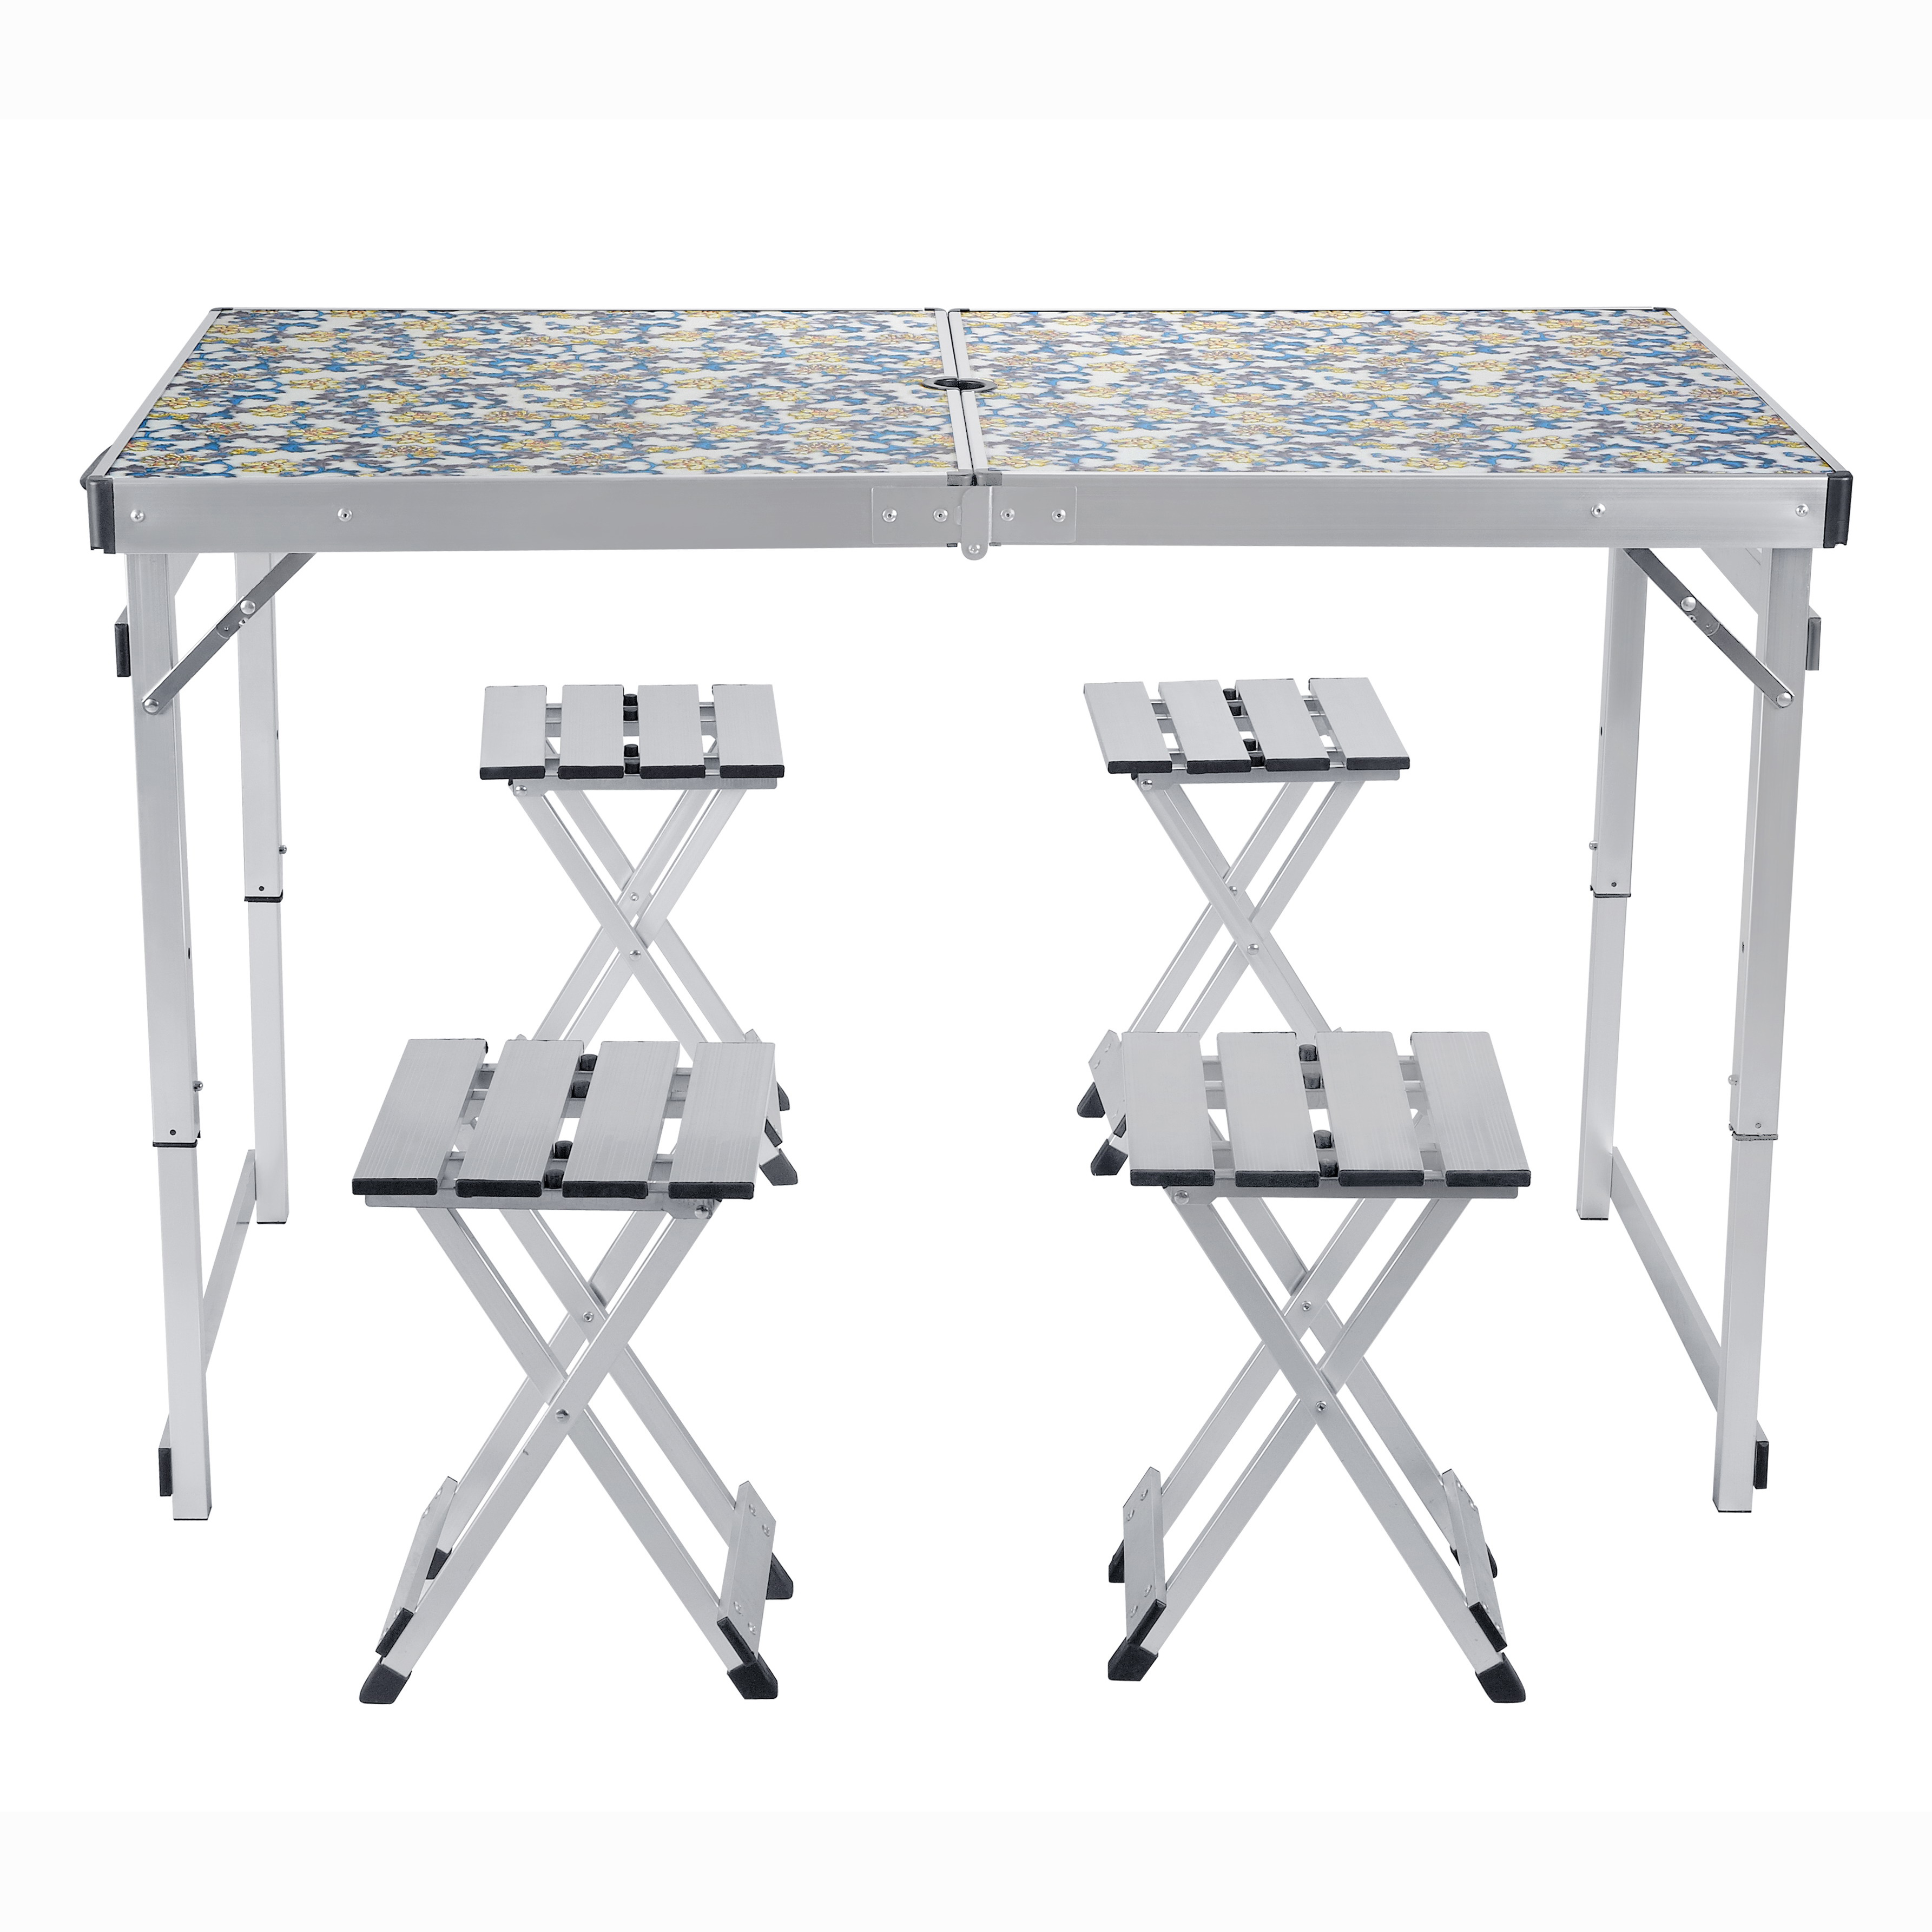 Features of outdoor camping picnic folding table material